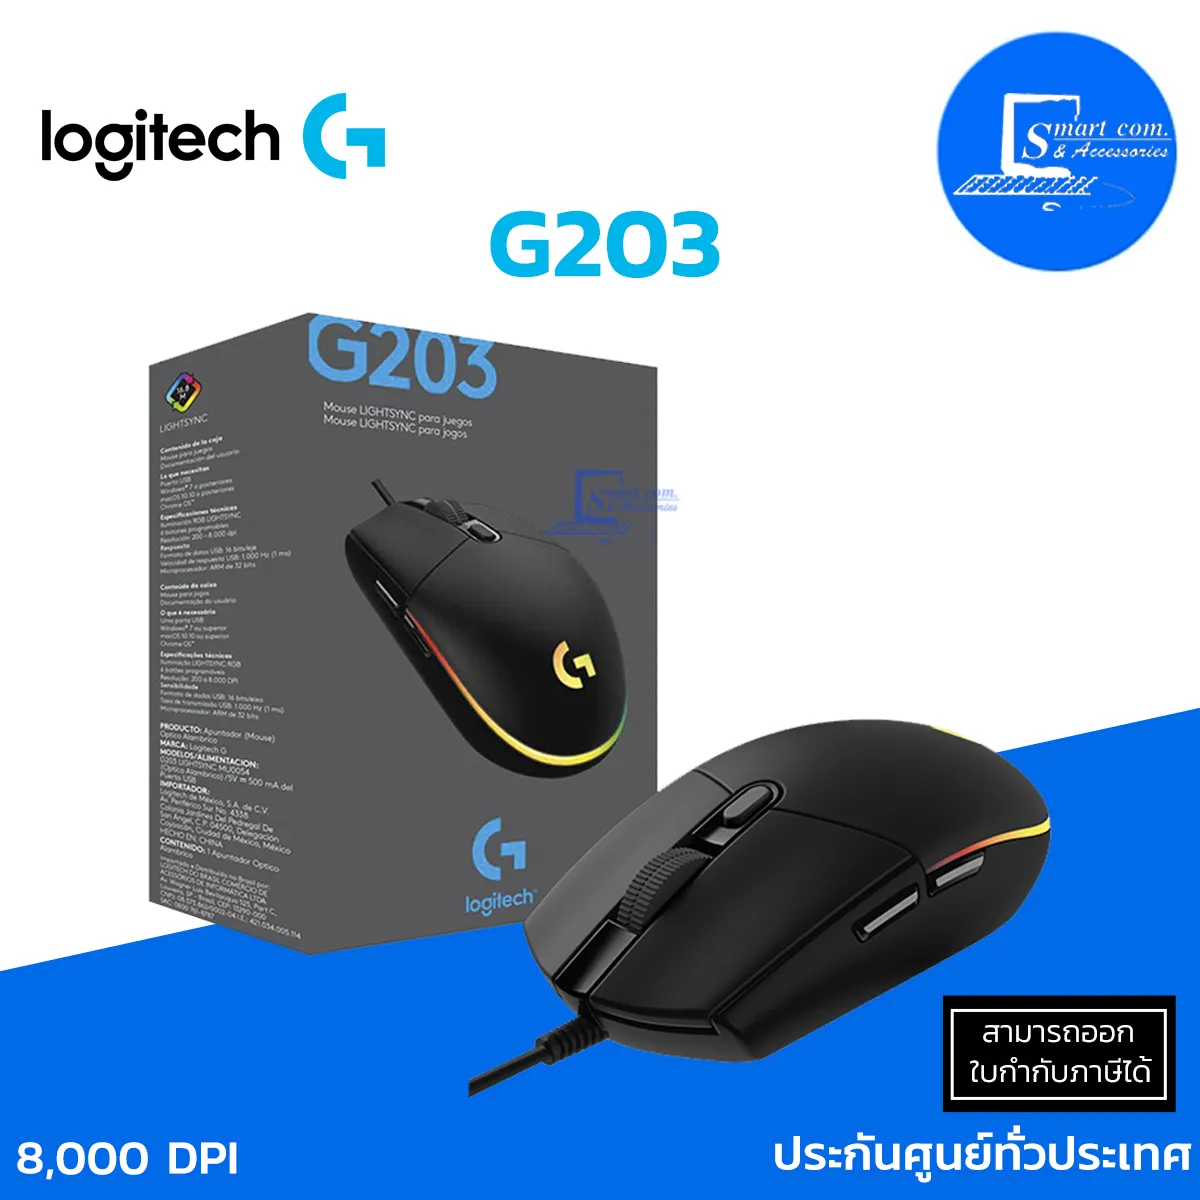 Wired LIGHTSYNC Logitech Gaming G203 Mouse